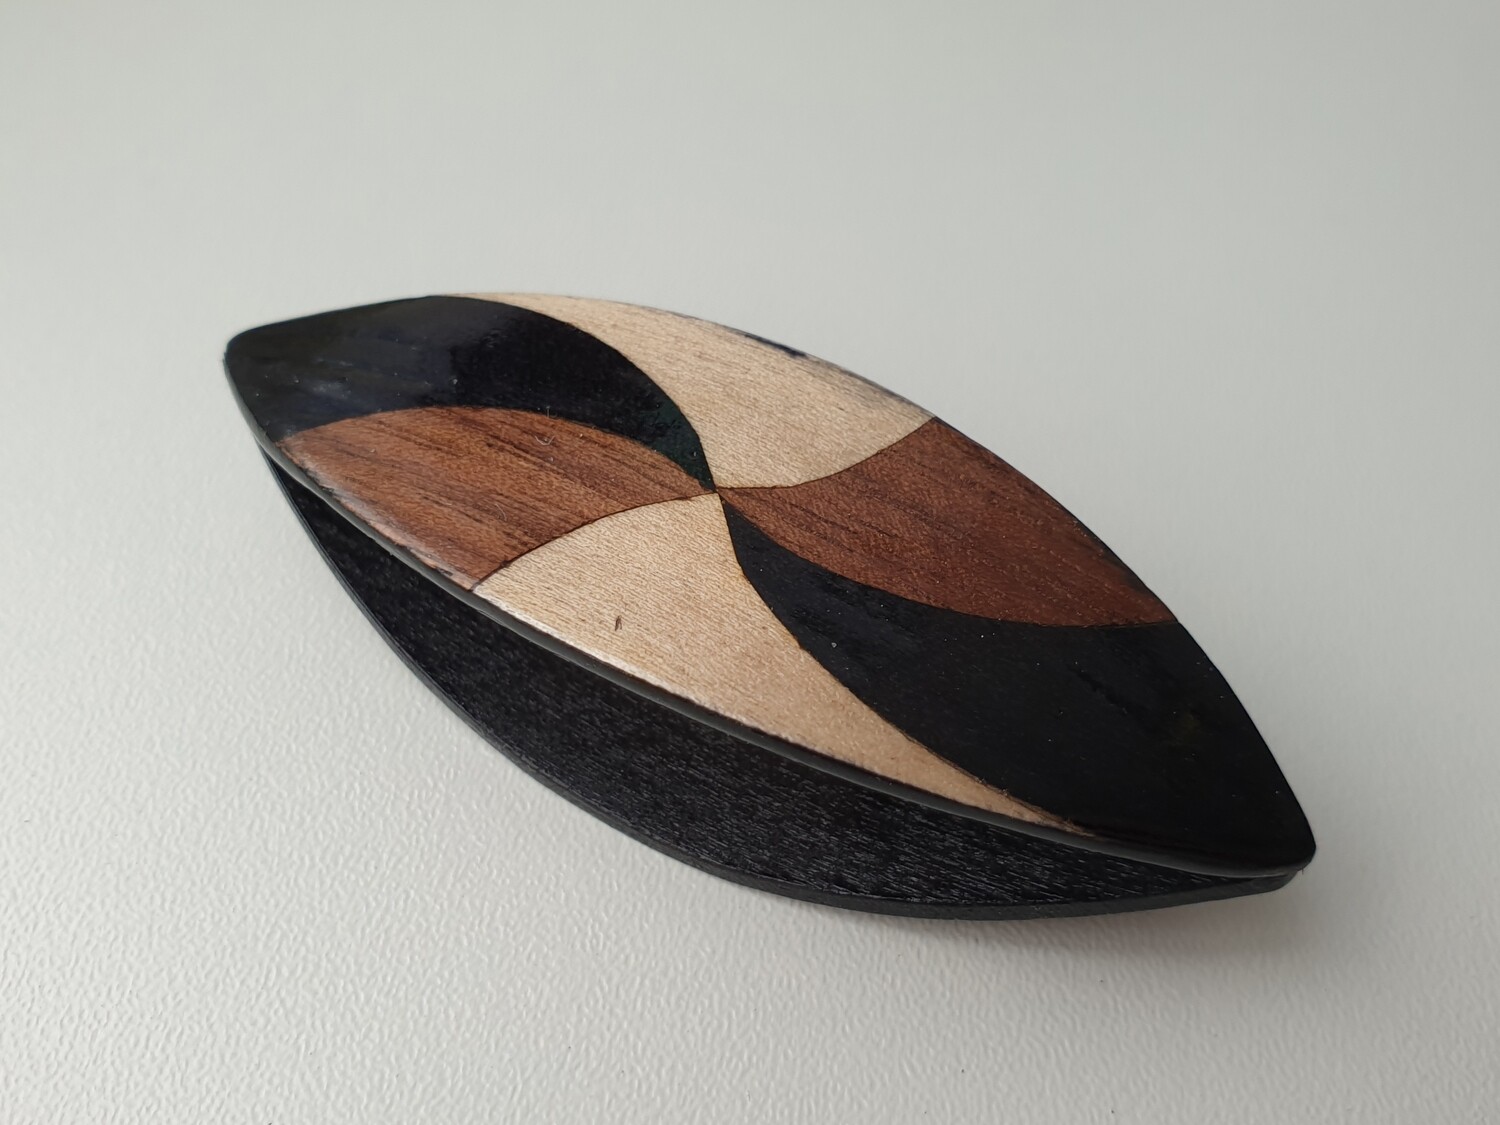 Tatting Shuttle Black Wood With Maple And Walnut Inlays